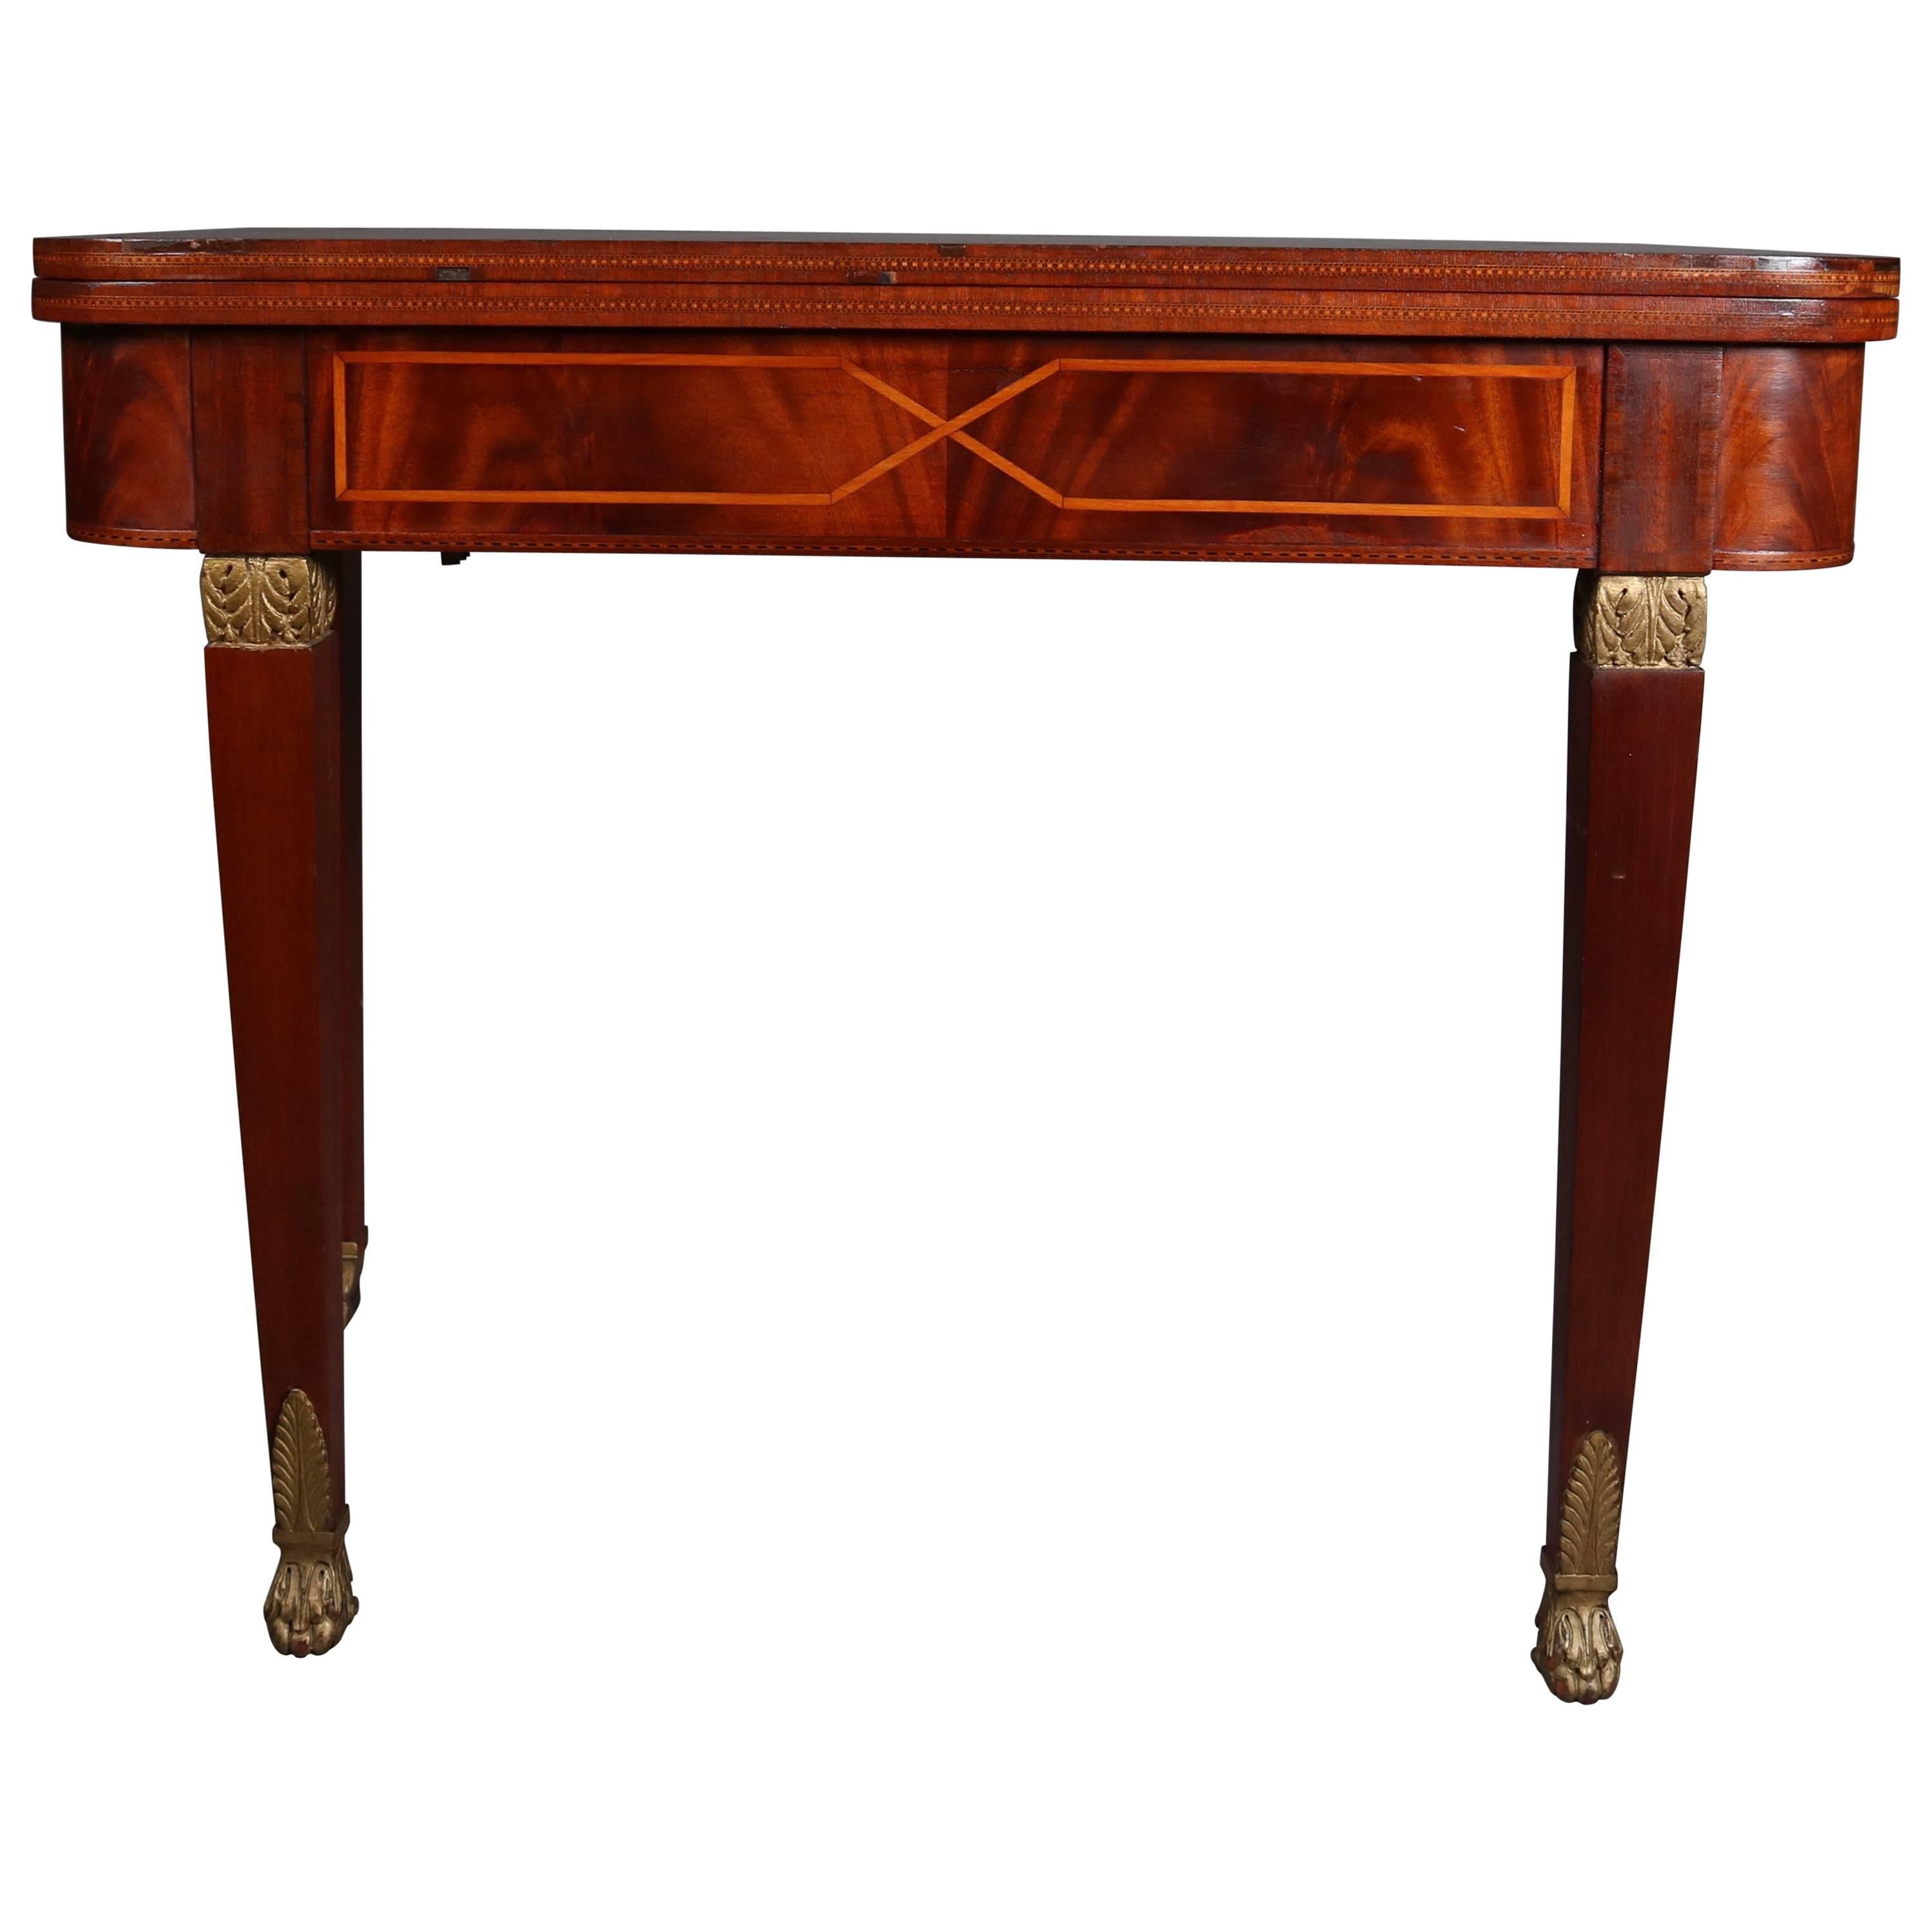 Antique French Empire Flame Mahogany Satinwood Banded and Gilt Game Table, 19thC